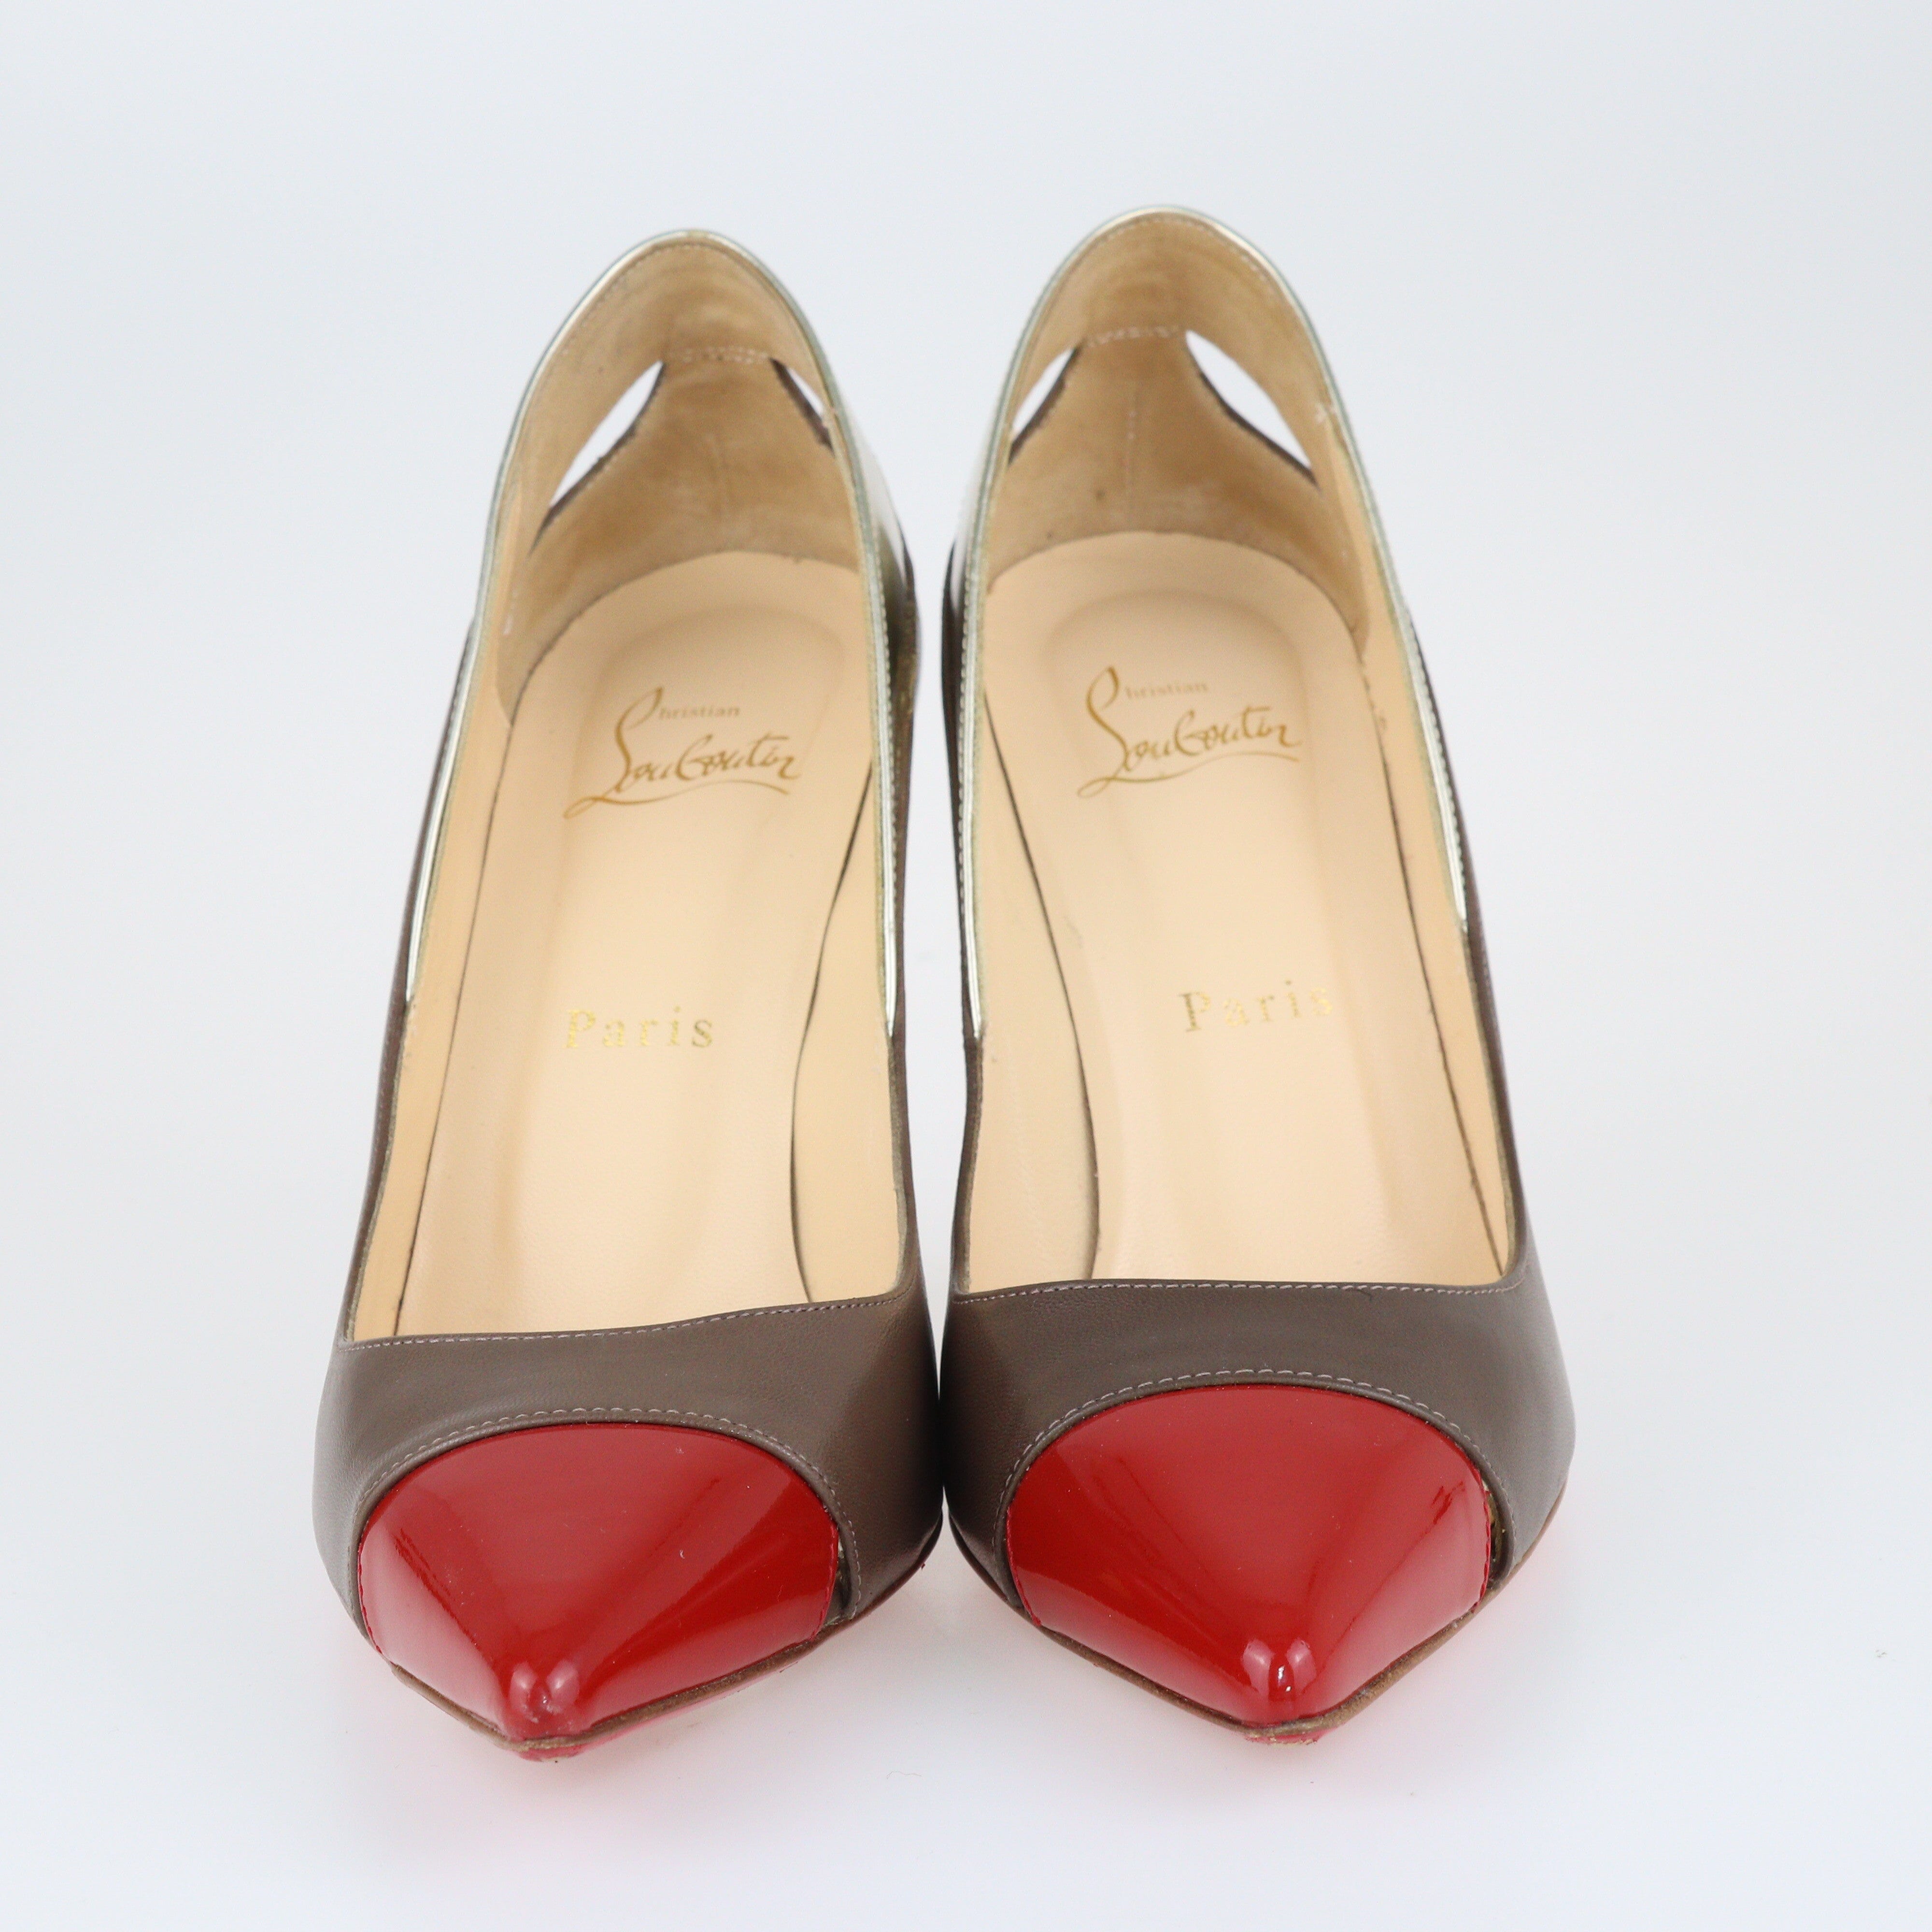 Tri Color Pointed Toe Pumps Shoes Christian Louboutin 